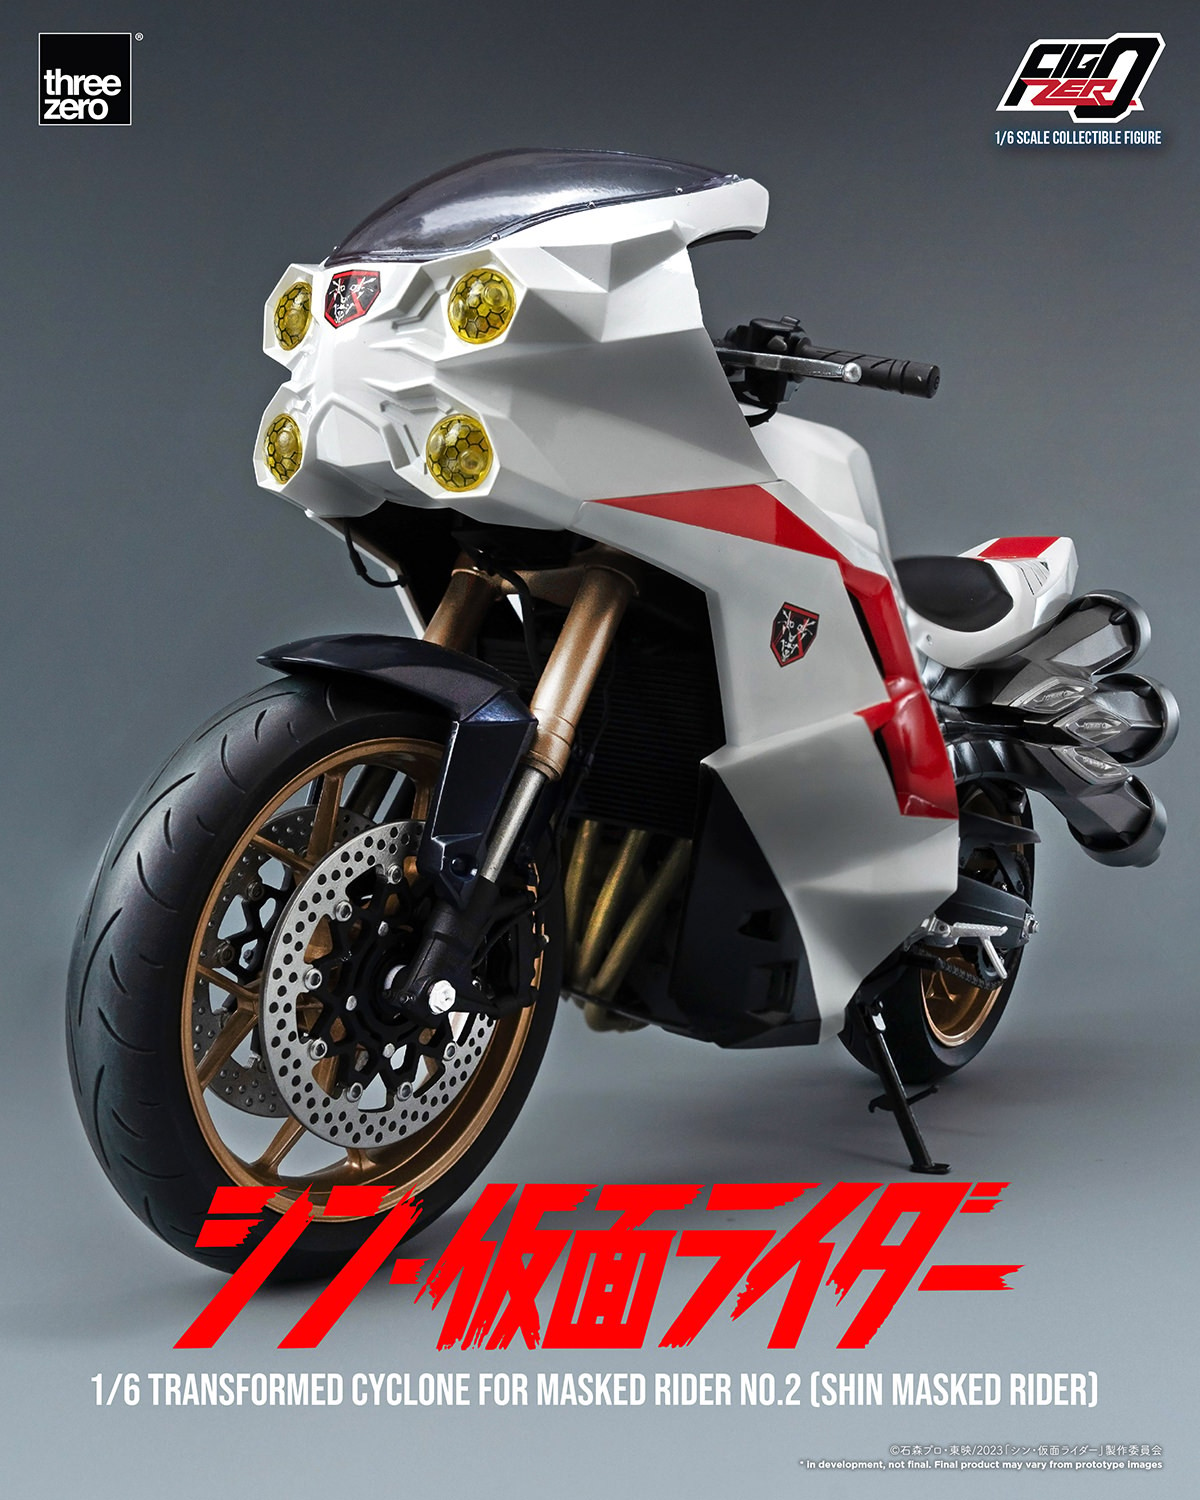 Transformed Cyclone for Masked Rider No. 2 (Shin Masked Rider) (Prototype Shown) View 4